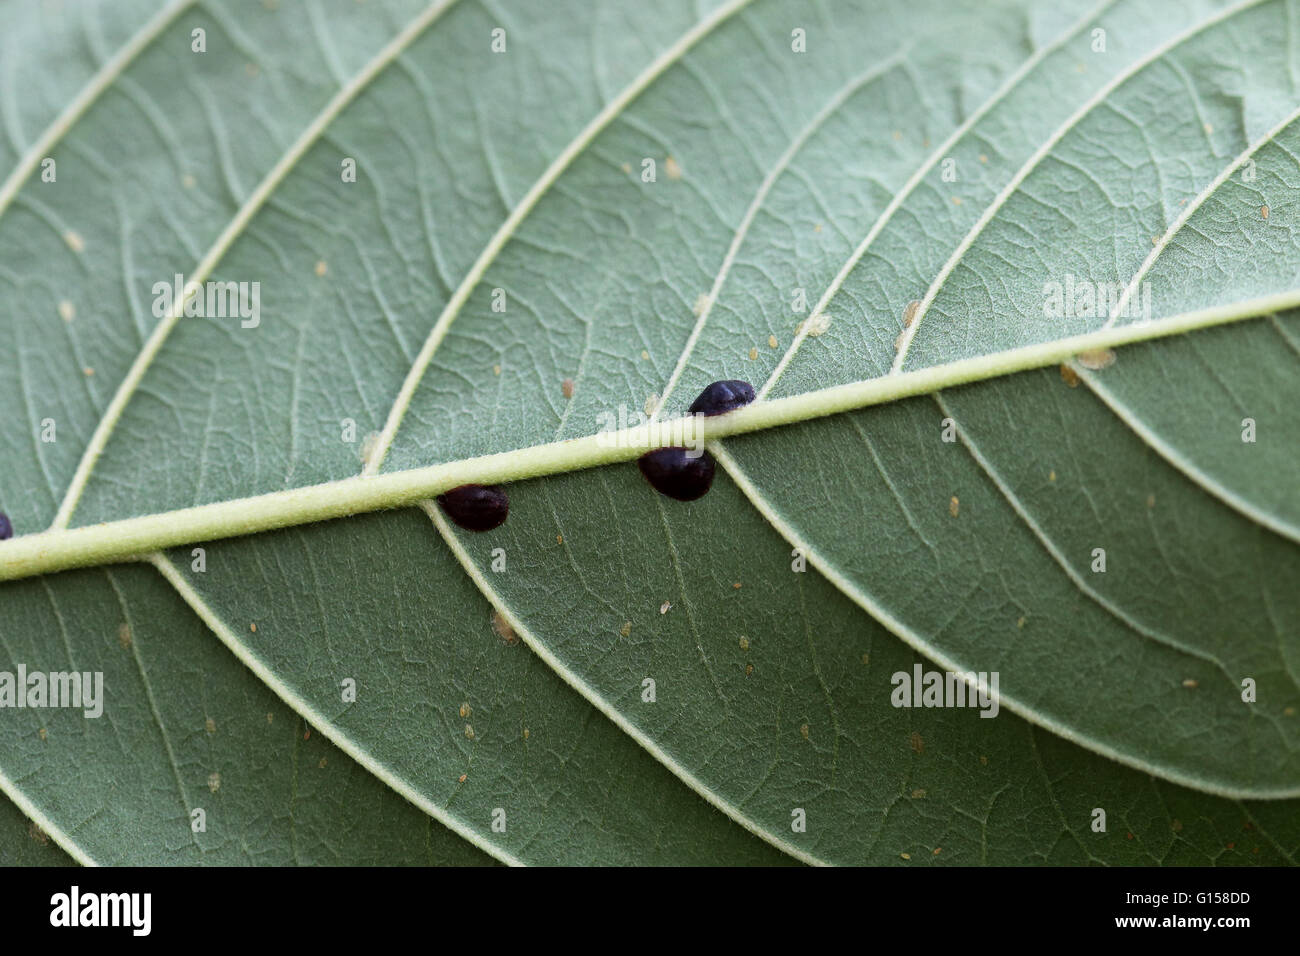 Macro image of Scale insects on guava leaf, other names include soft scales, wax scales or tortoise scales. Stock Photo